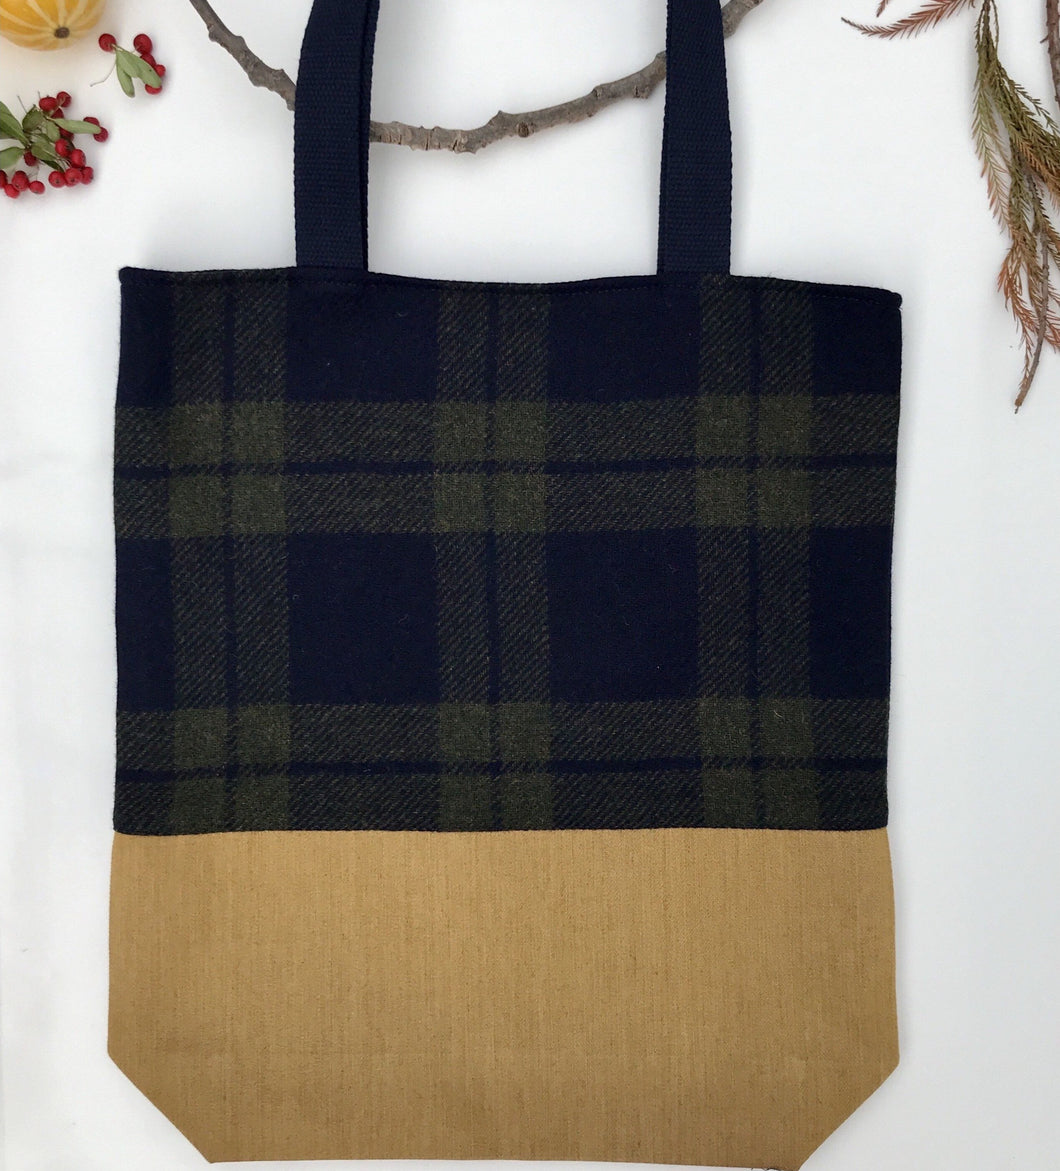 Tote bag. Navy blue and green tweed check design and mustard yellow denim tote.